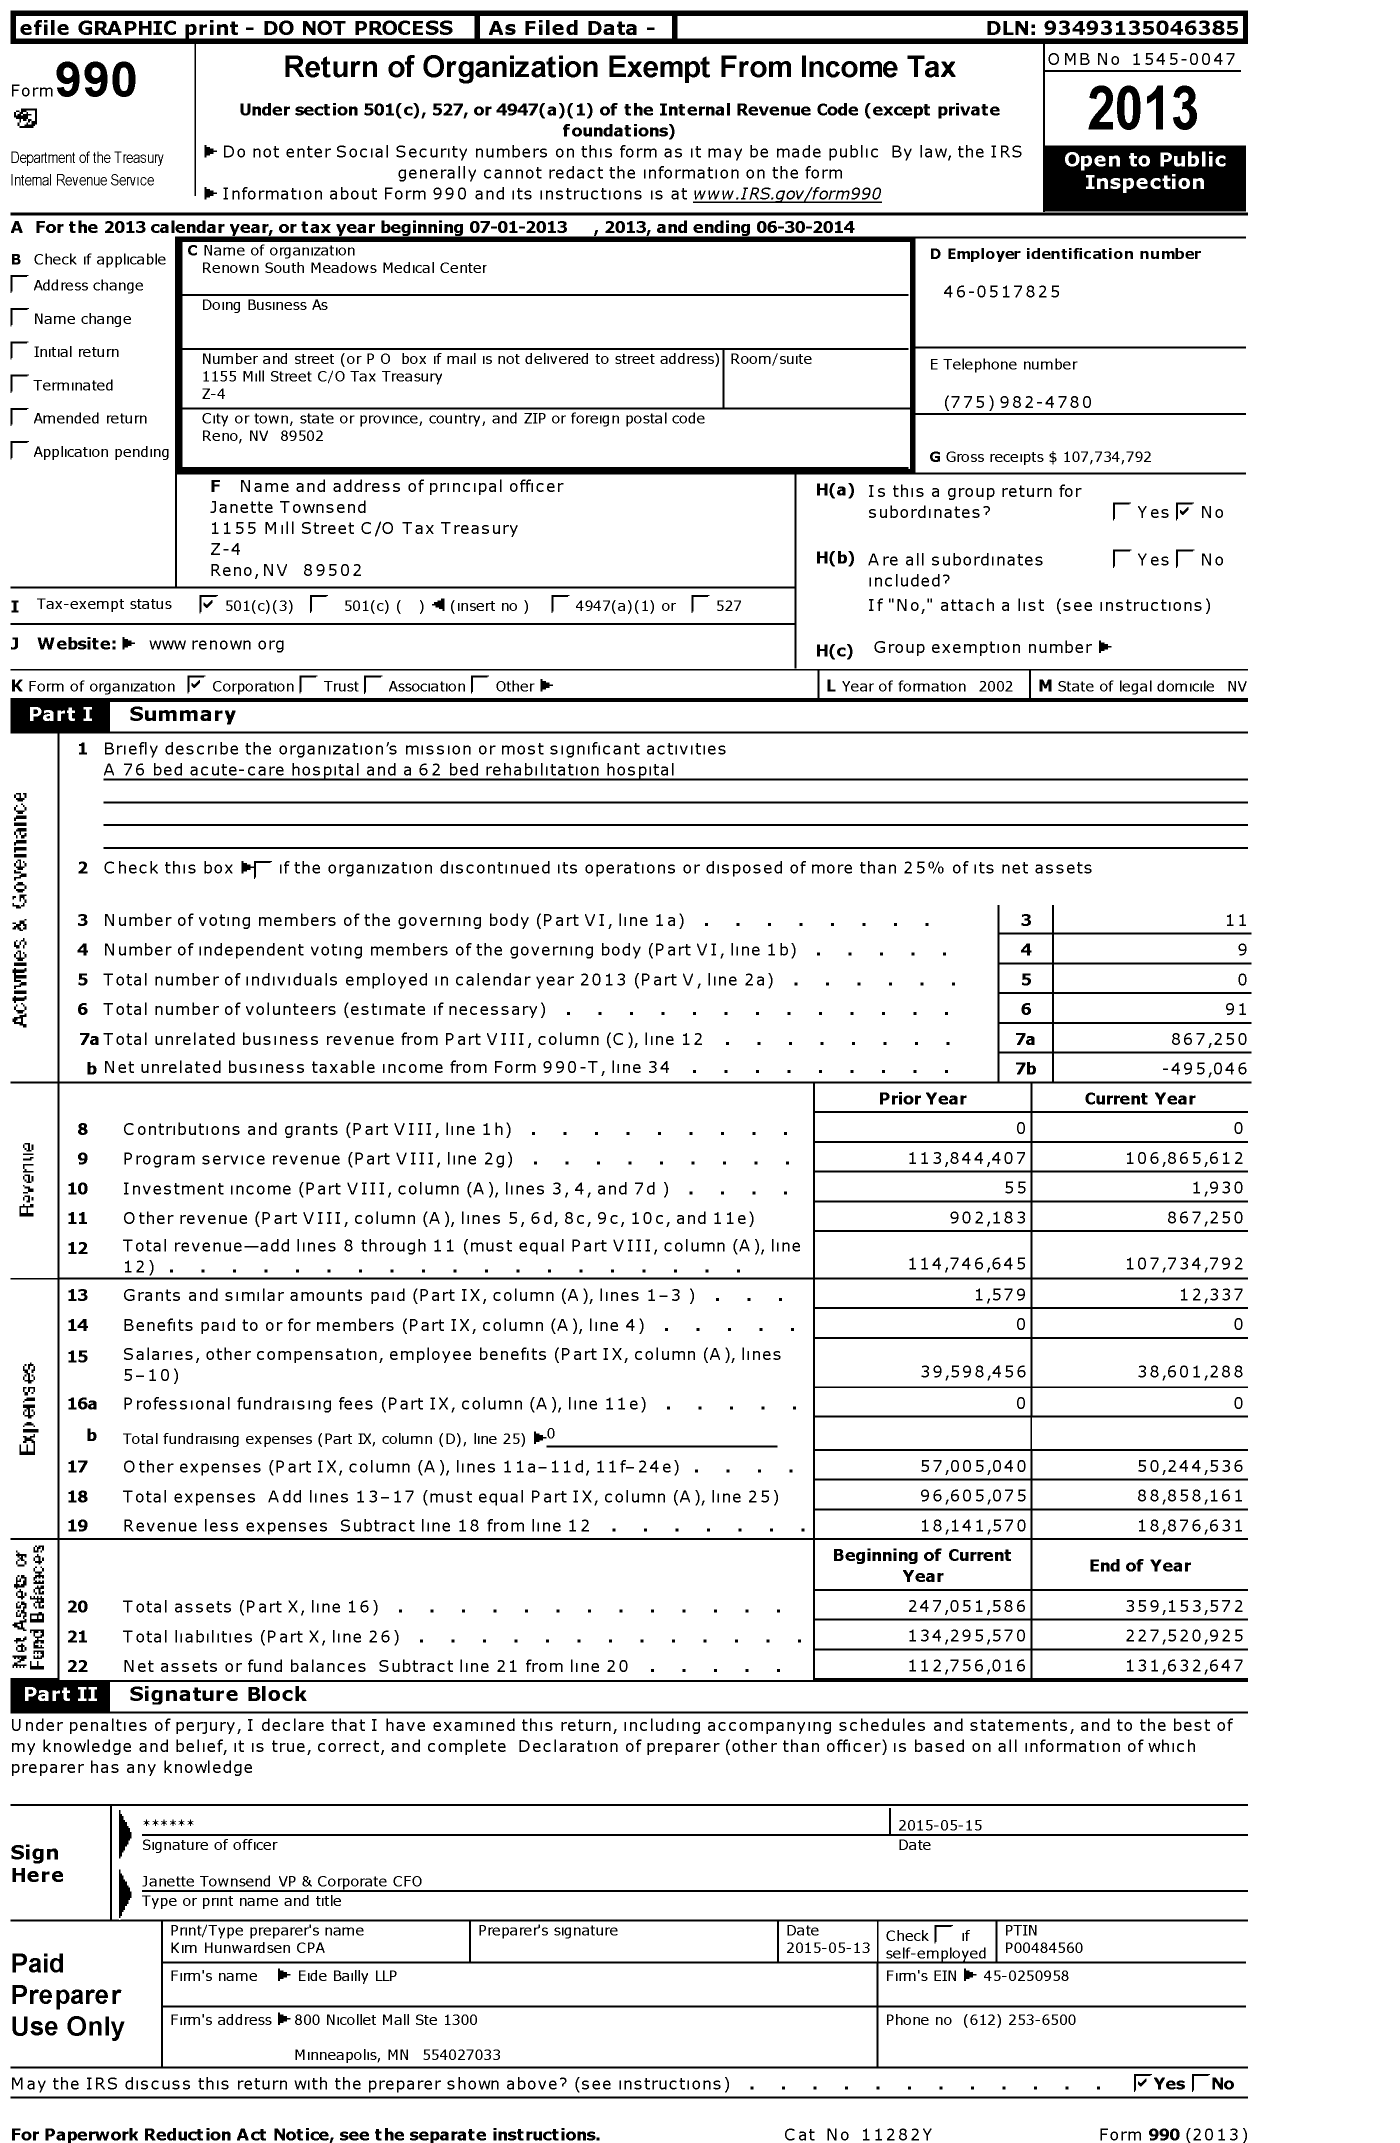 Image of first page of 2013 Form 990 for Renown South Meadows Medical Center